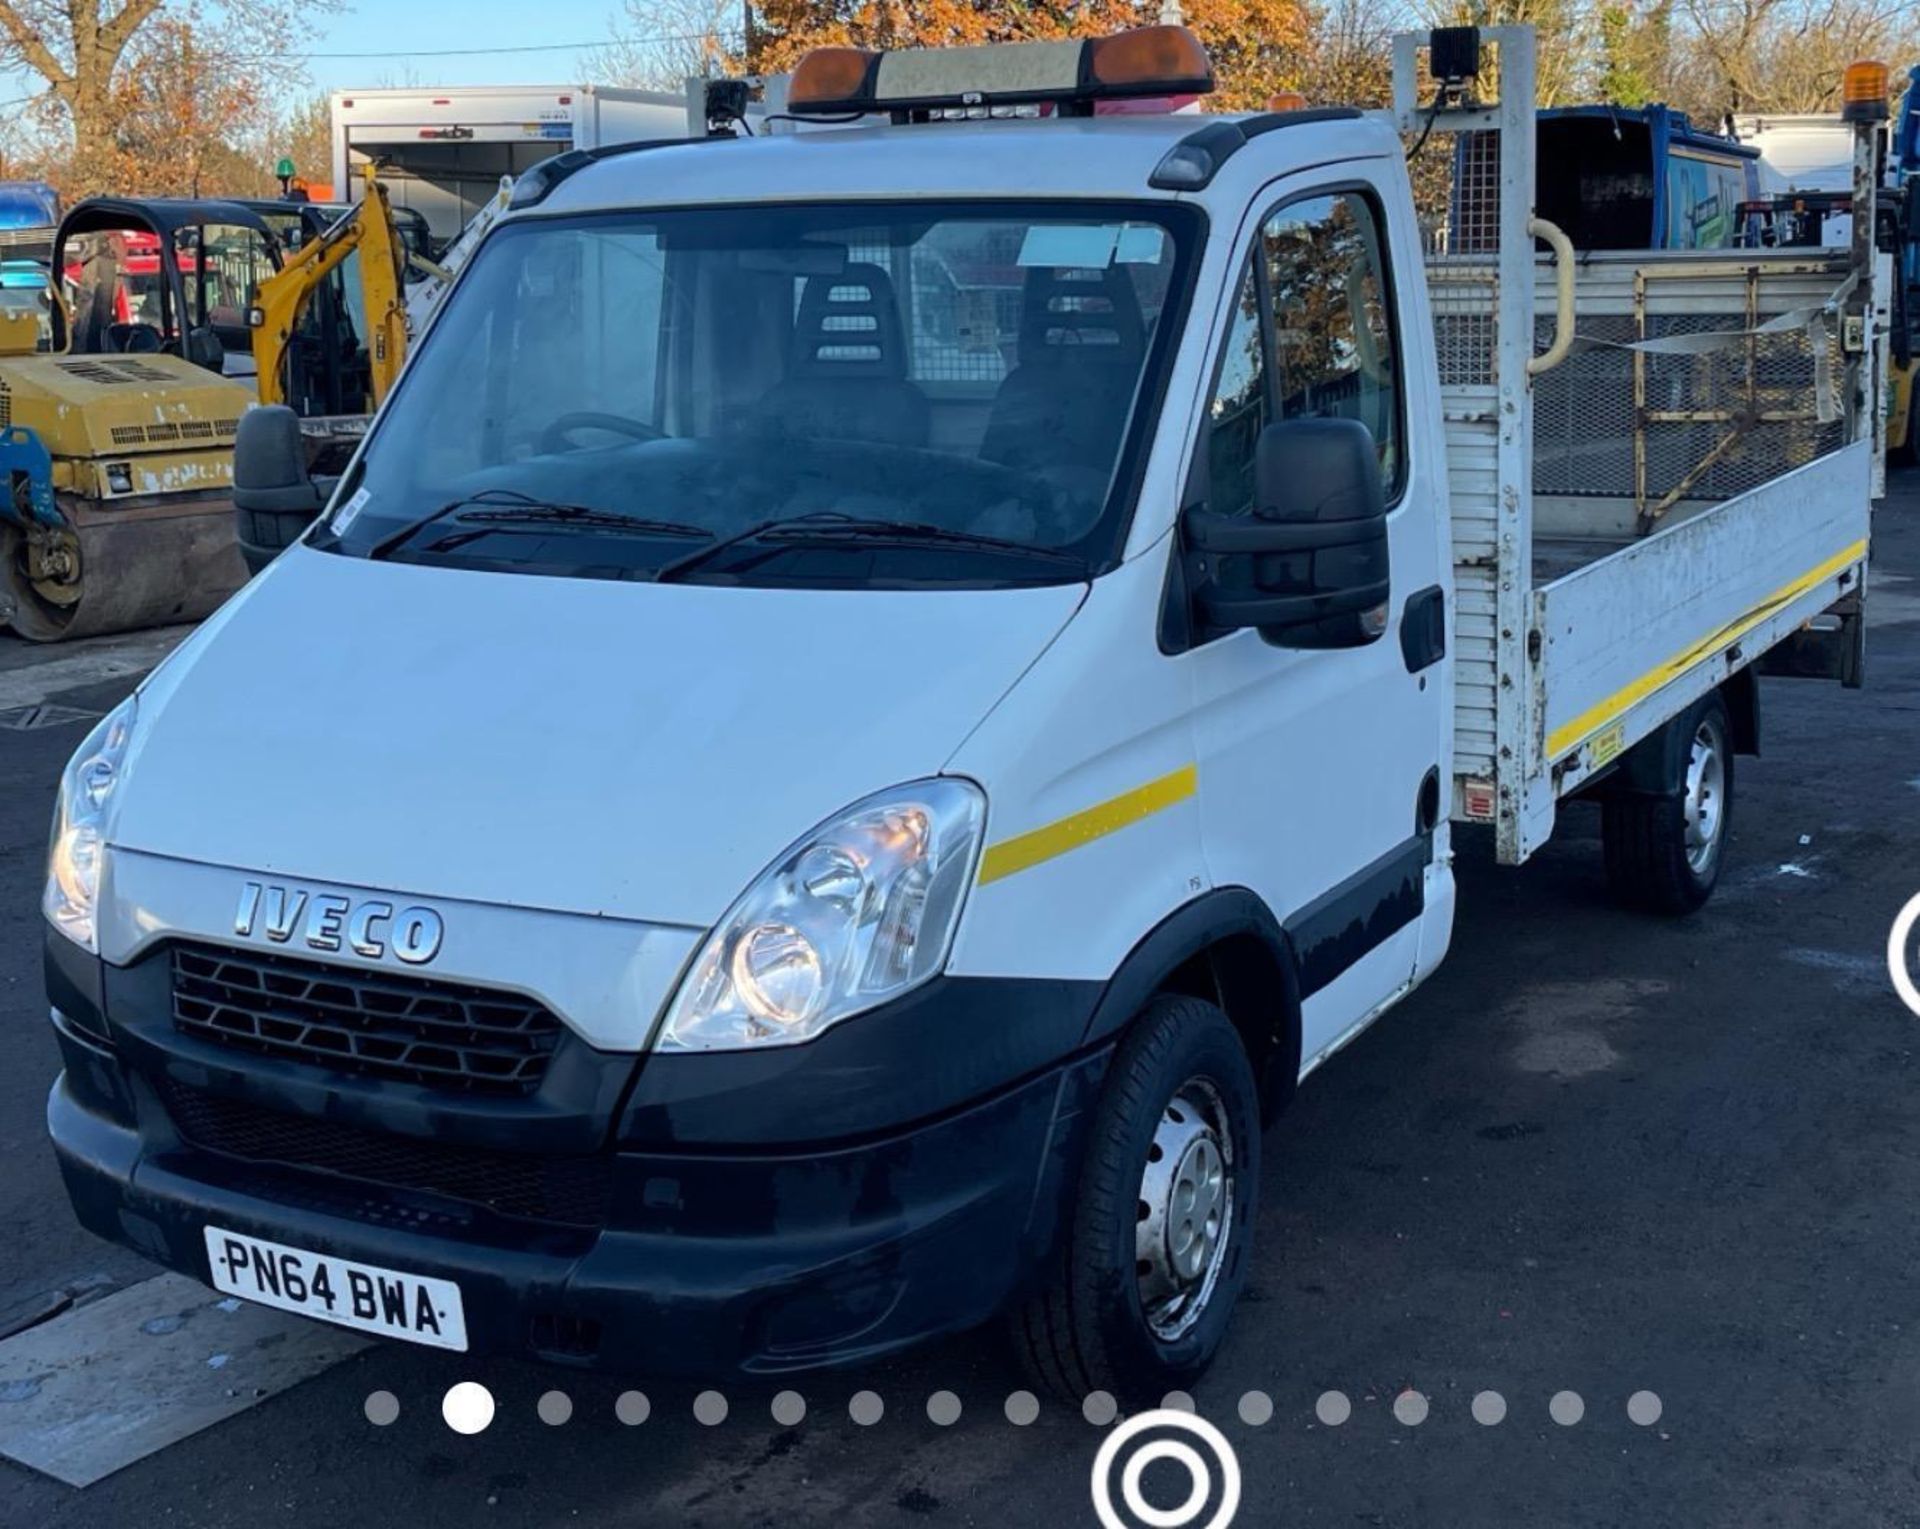 2015 IVECO DAILY -230K MILES- HPI CLEAR - READY TO GO!